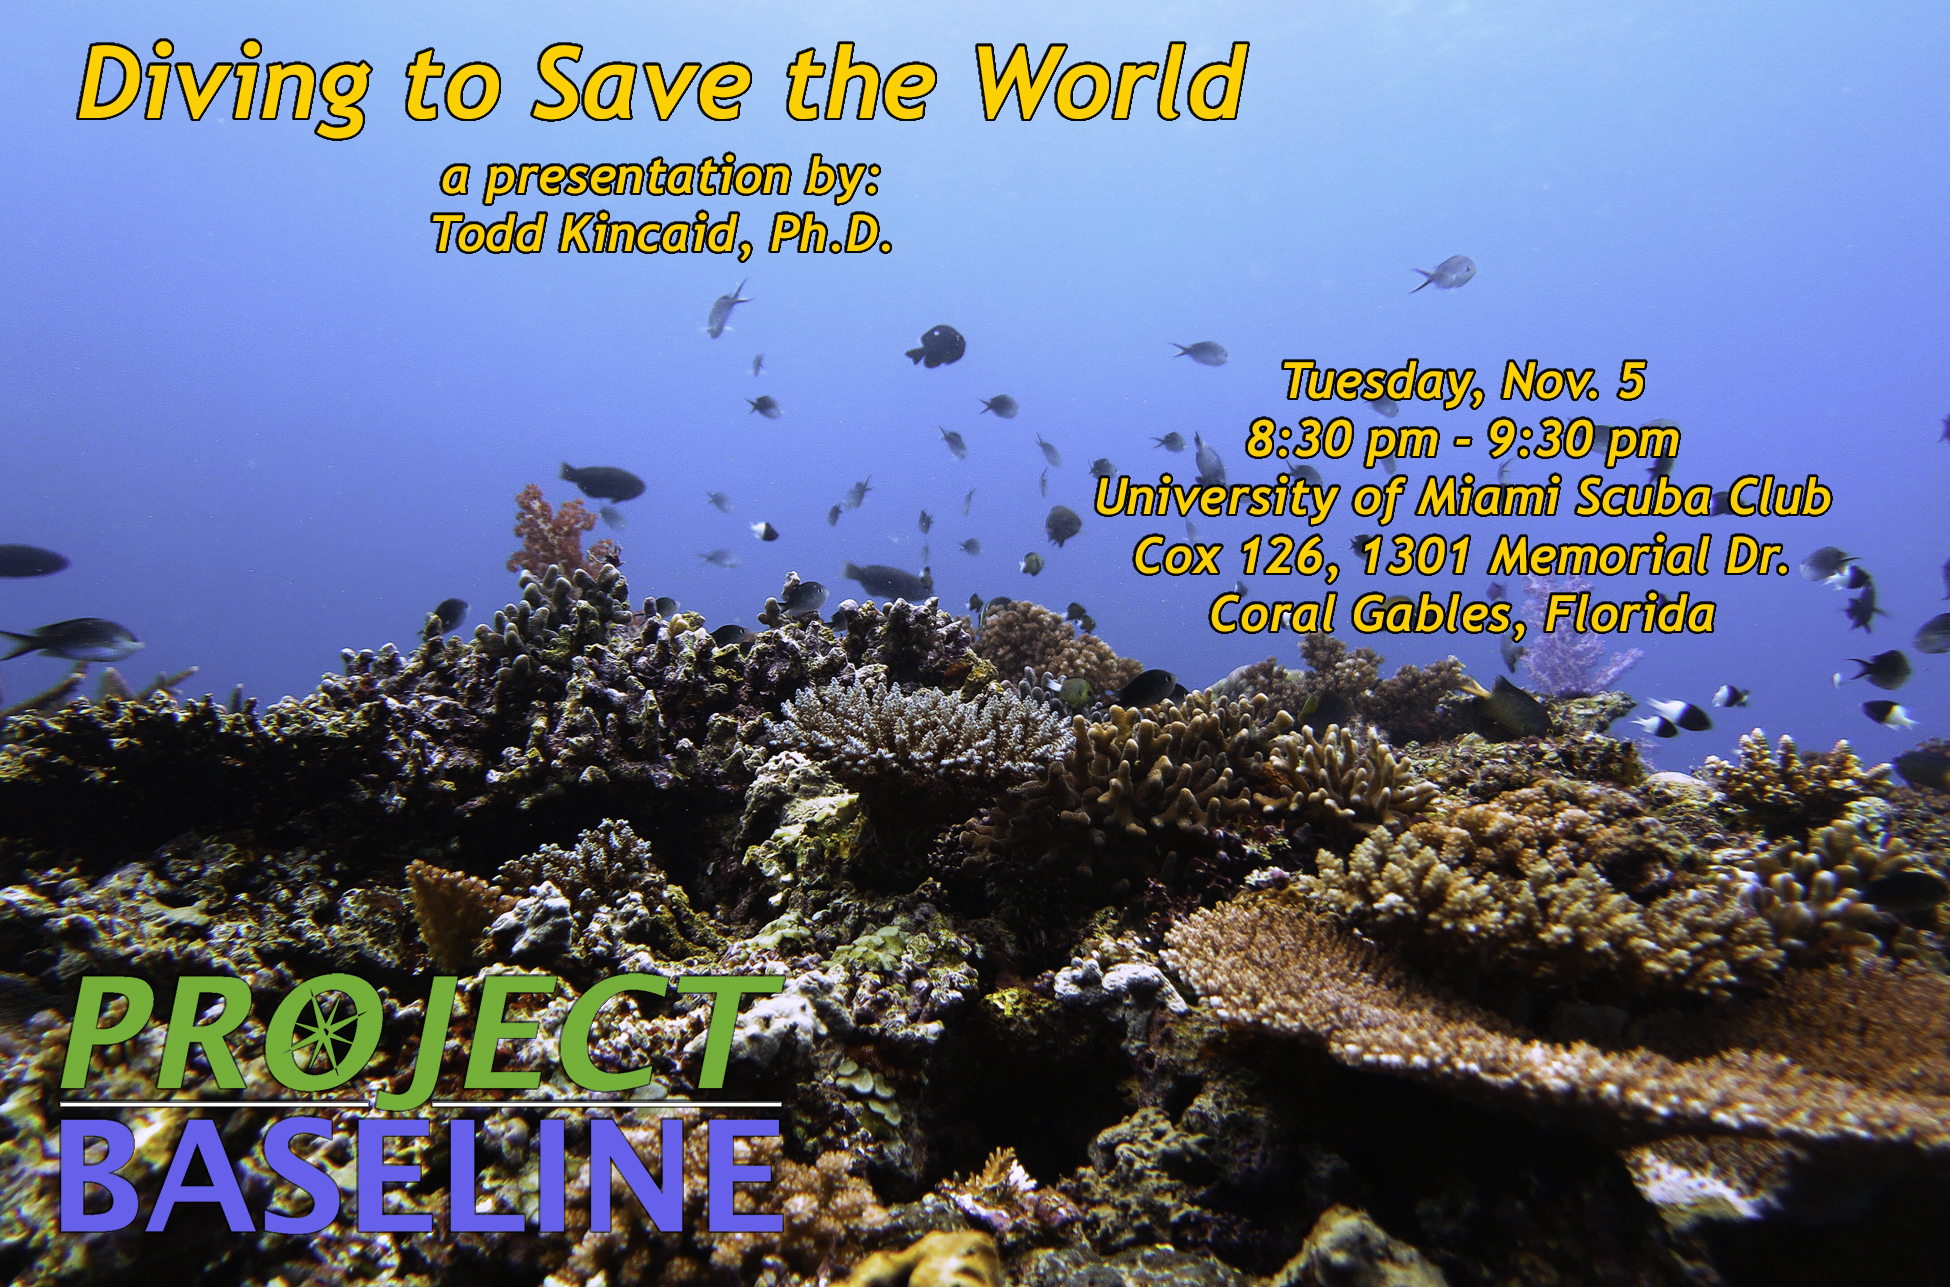 Come Meet Dr. Todd Kincaid at the University of Miami’s Scuba Club